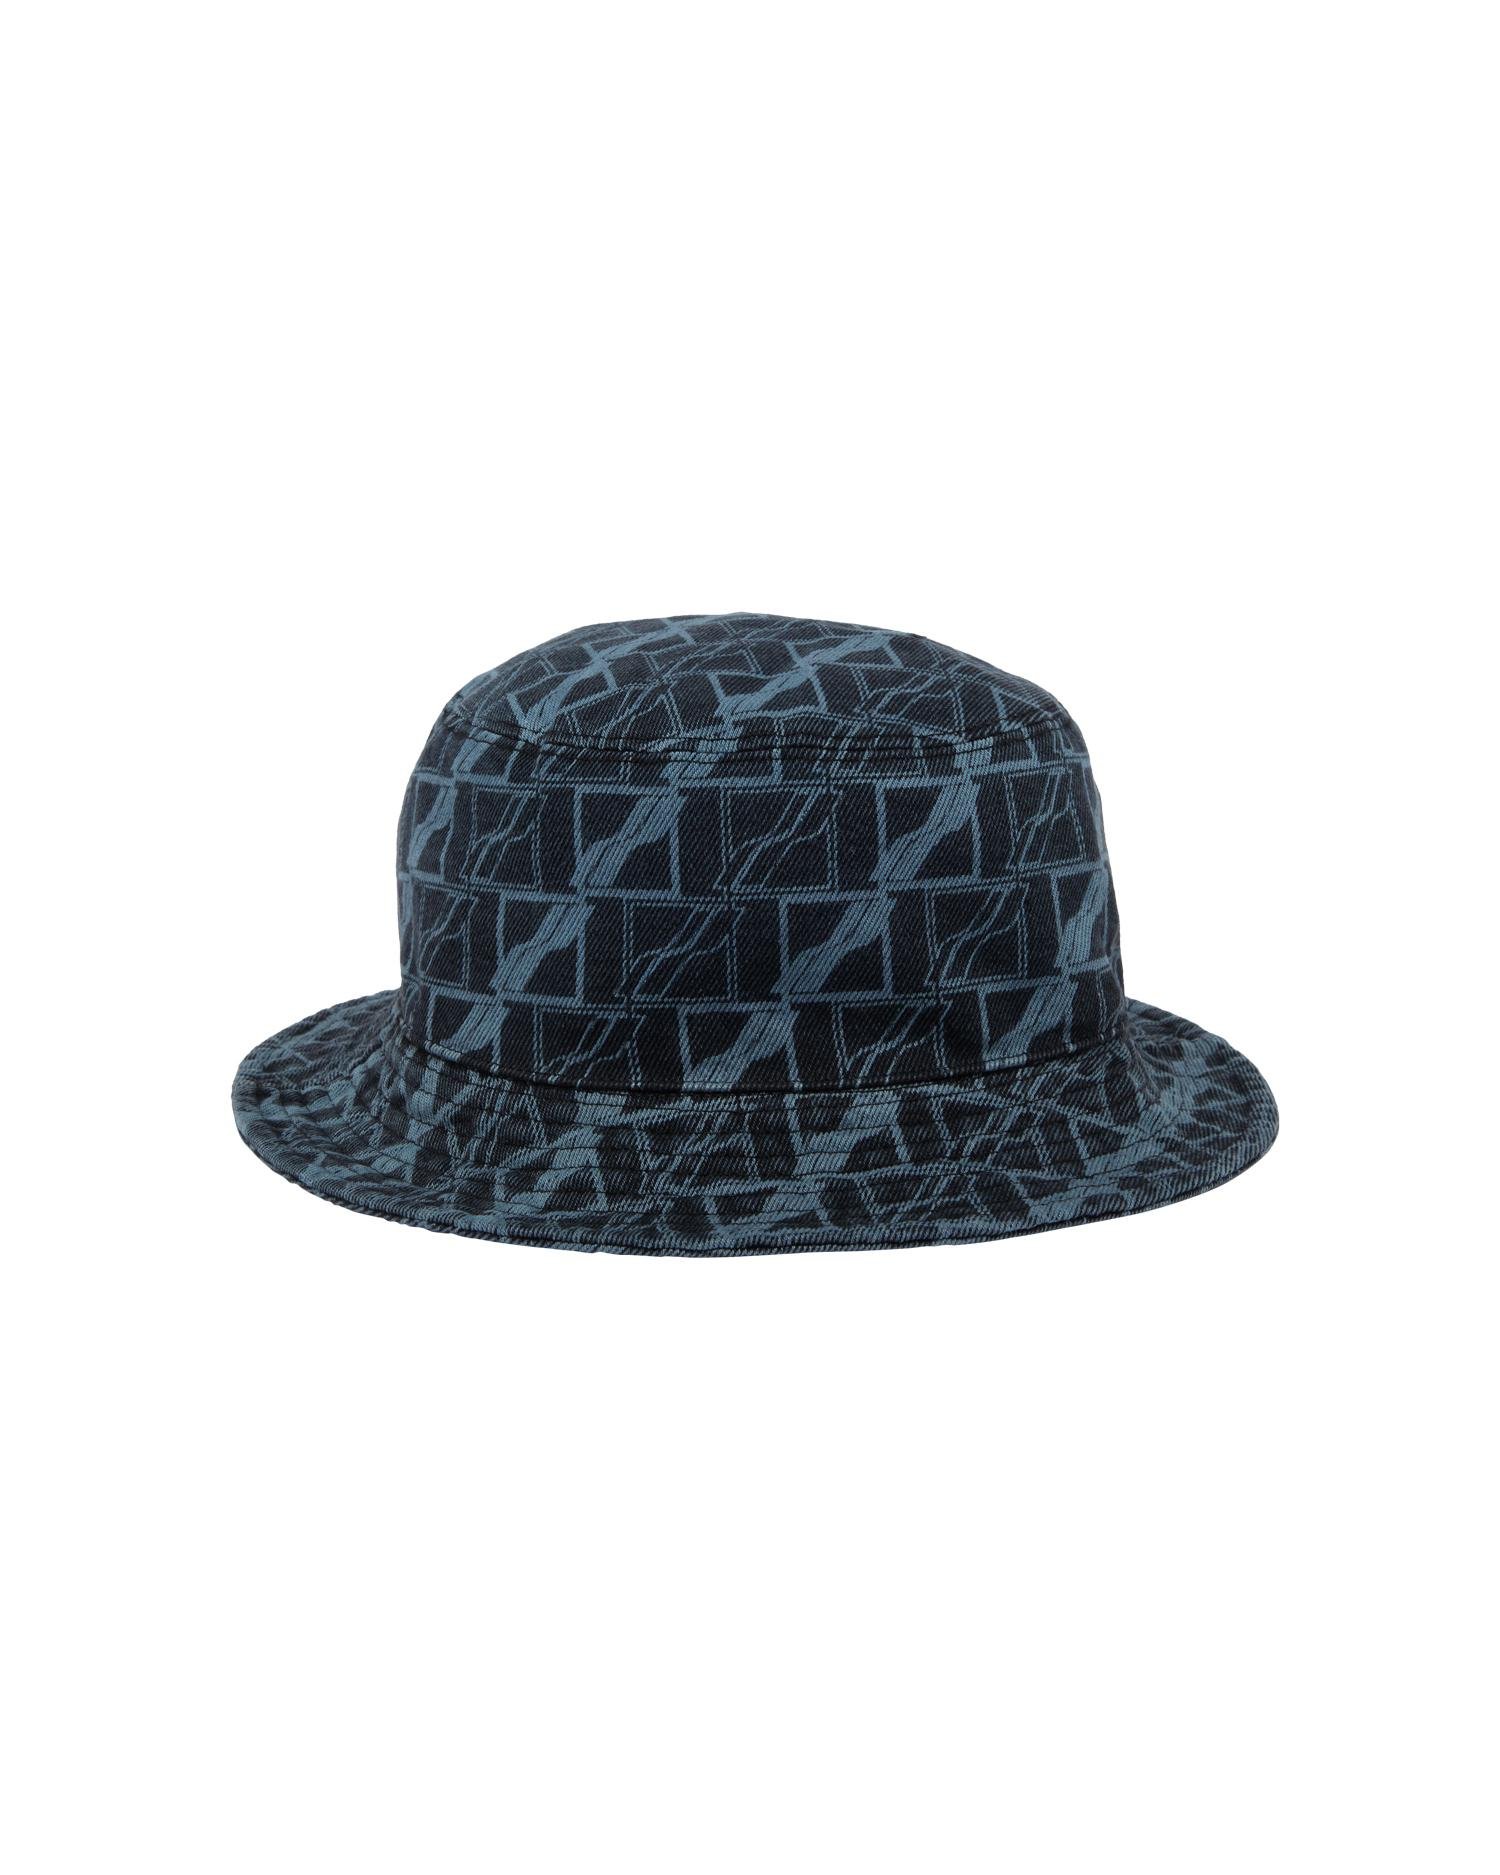 All-over denim bucket hat by WE11DONE | jellibeans